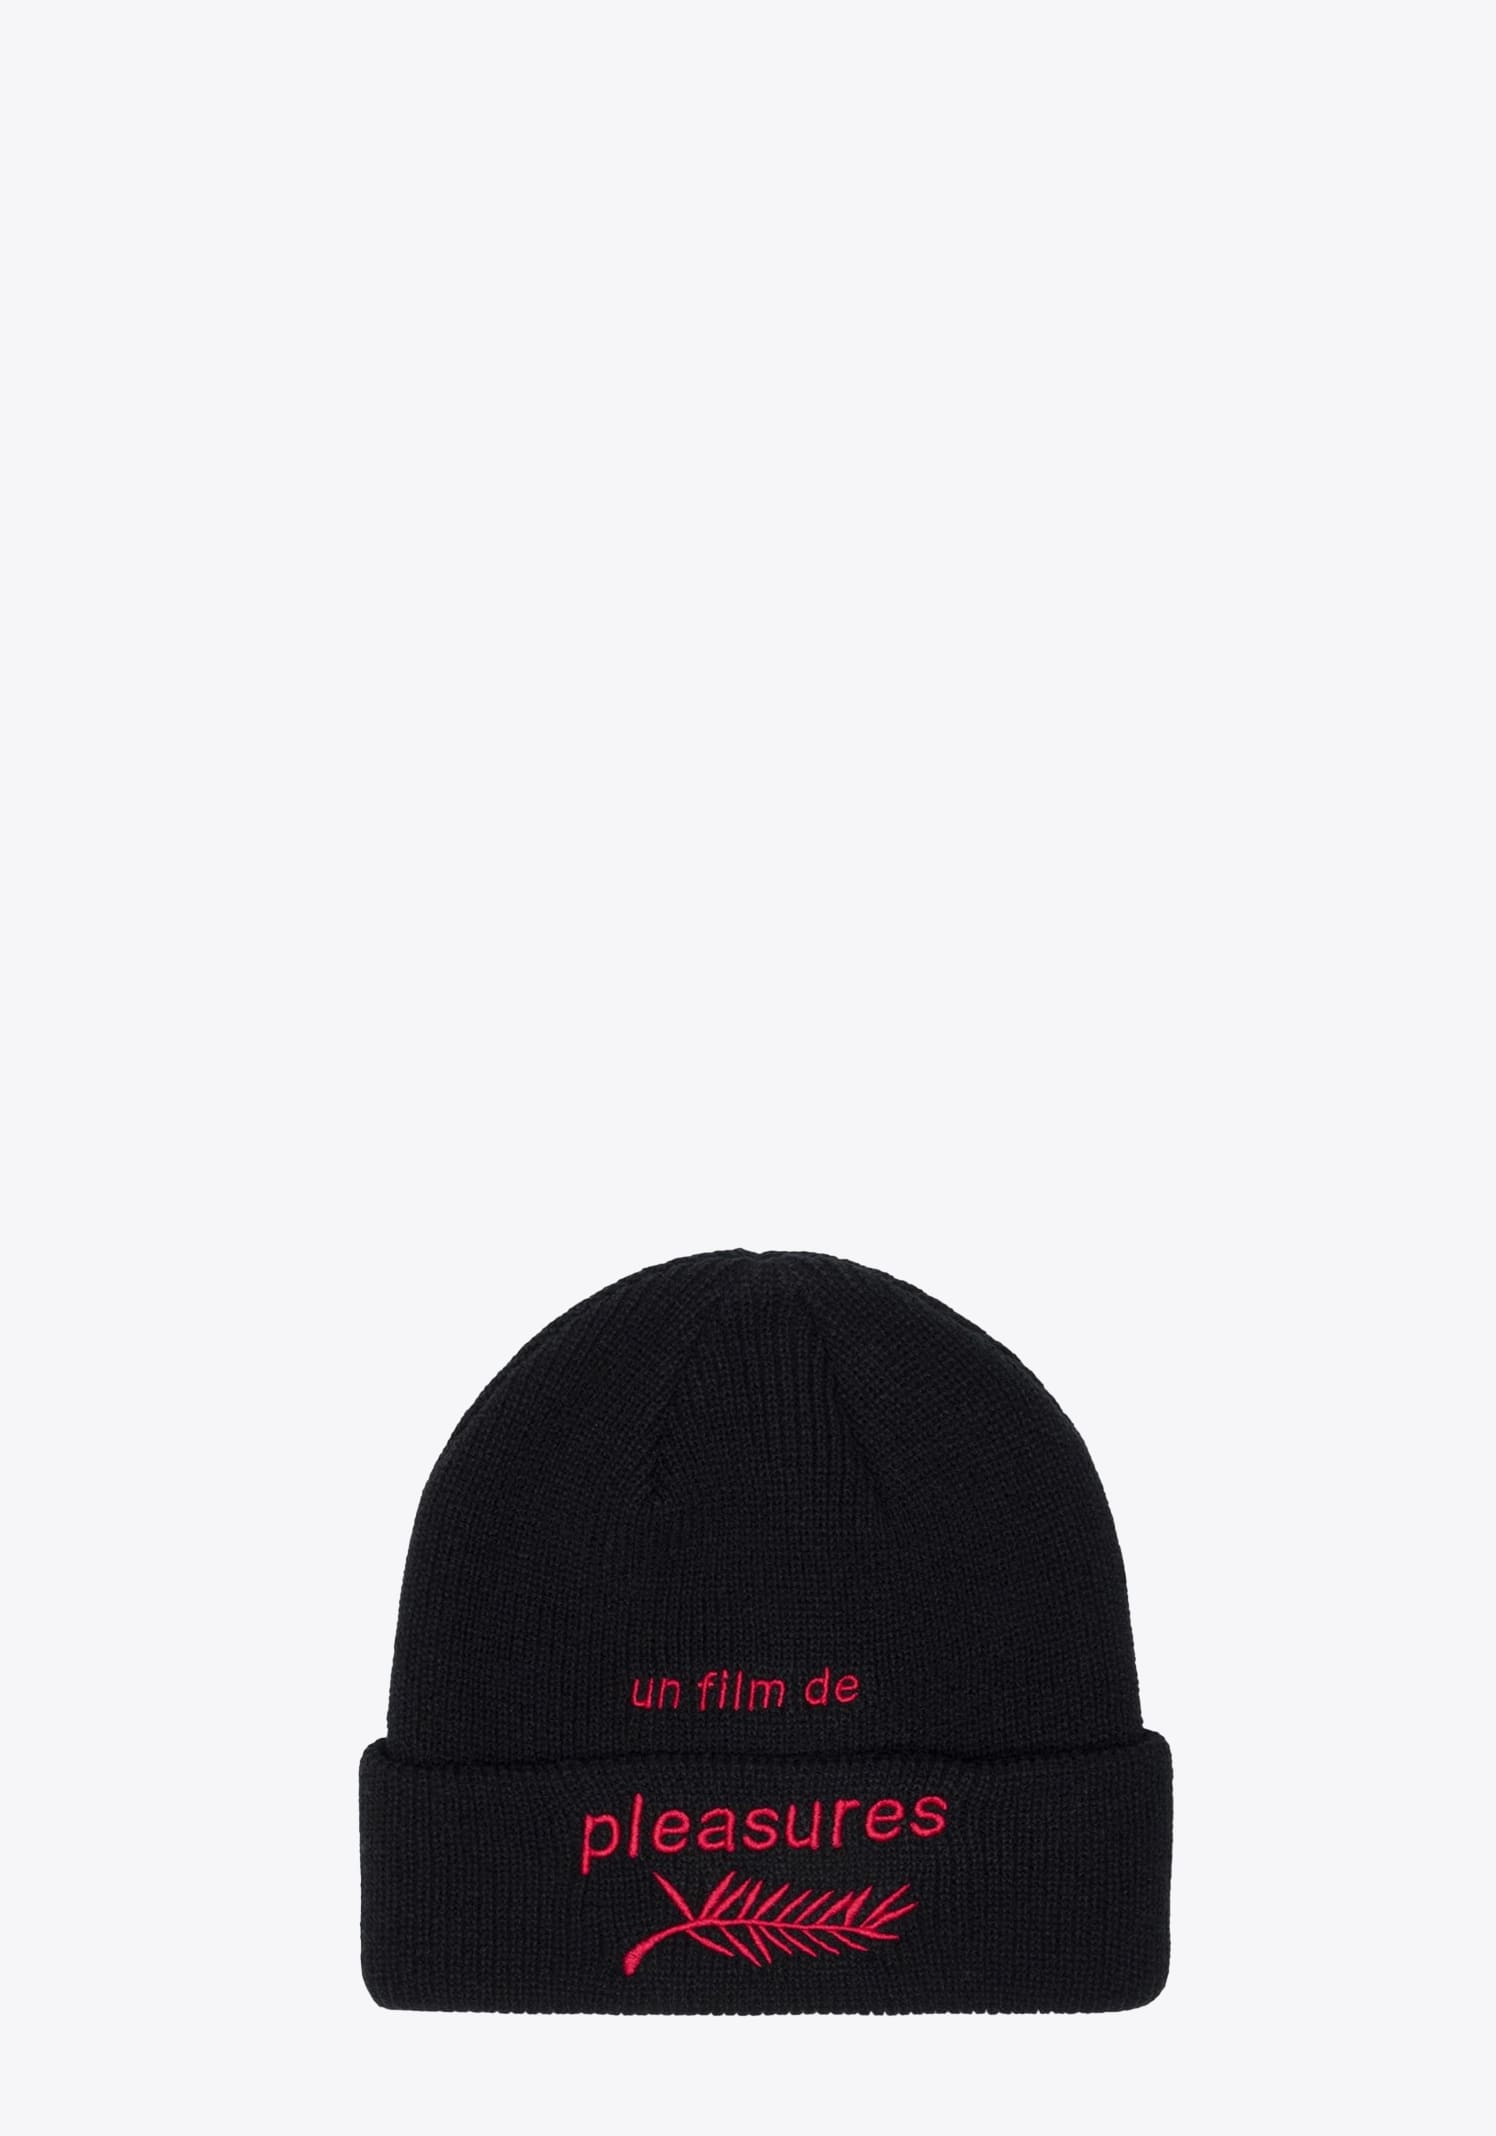 Pleasures Film Beanie Black rib knit beanie with red embroidery